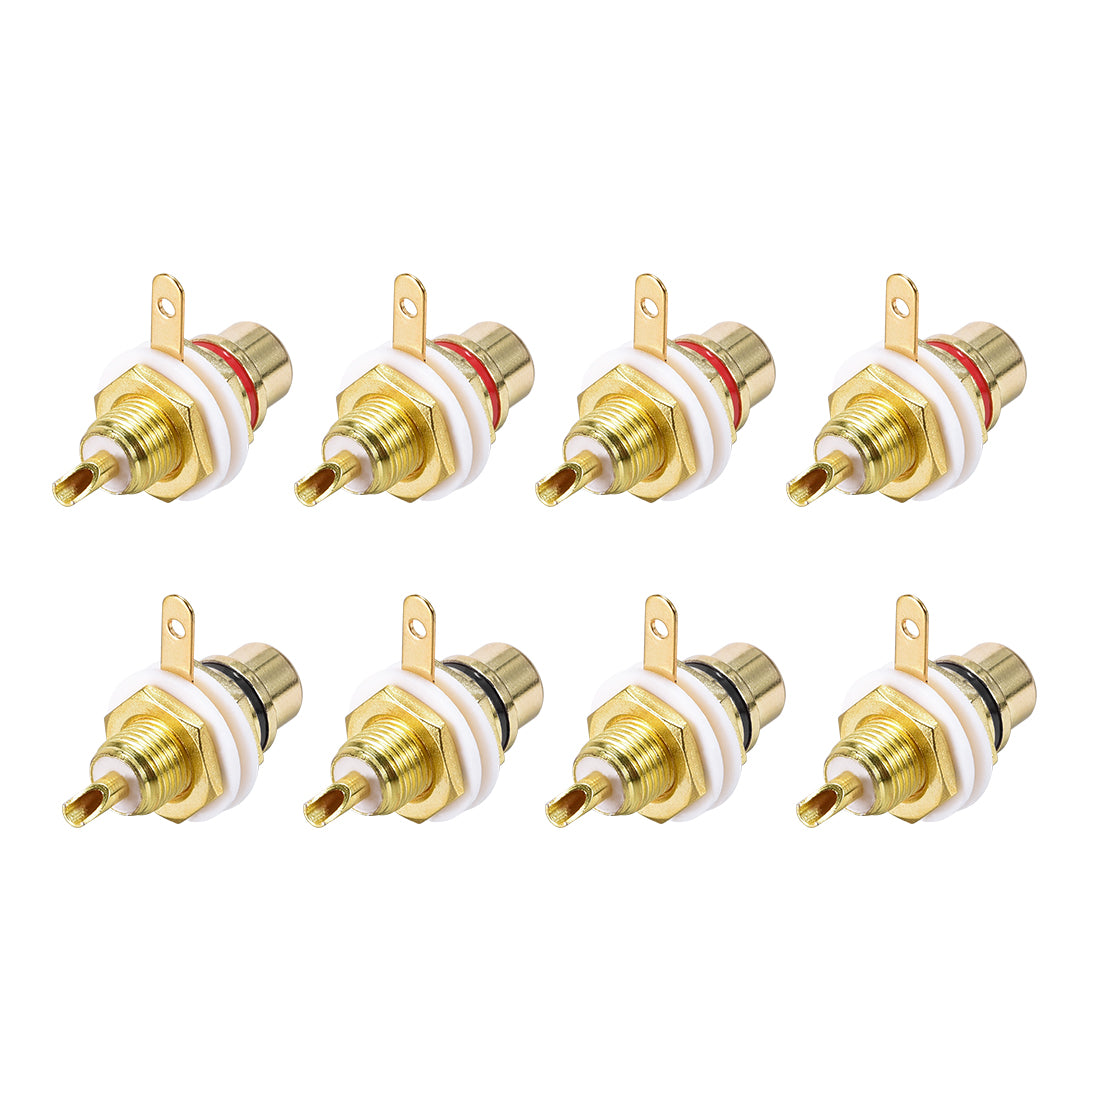 uxcell Uxcell RCA Female Panel Mount Chassis Socket Jack Connector for Amplifier Audio Terminal RCA Plug 8pcs